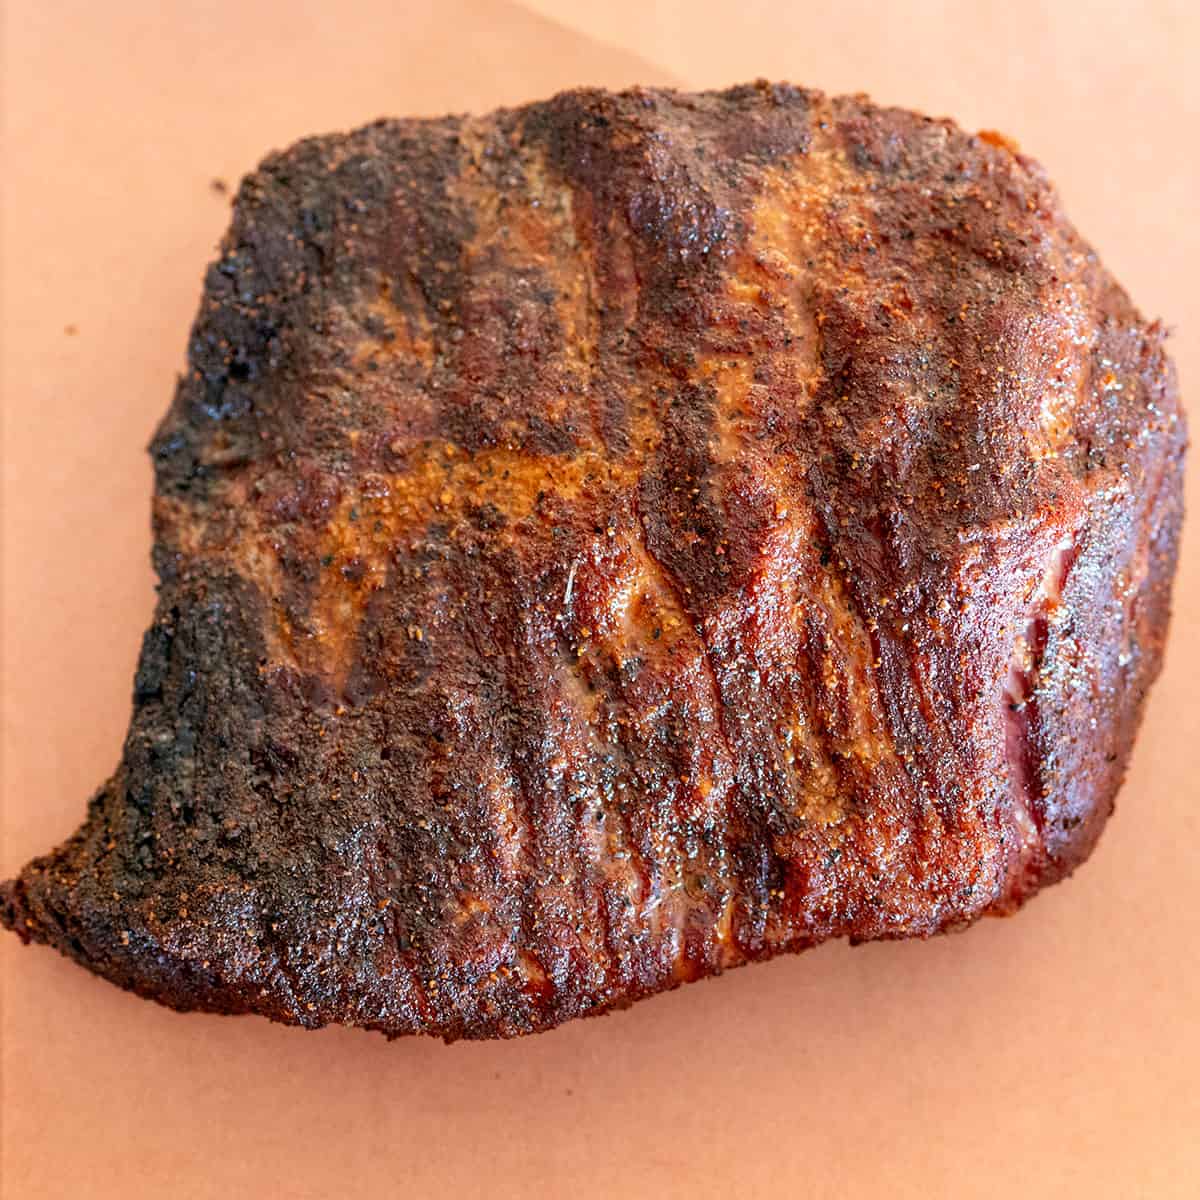 Smoked brisket point on butcher paper.